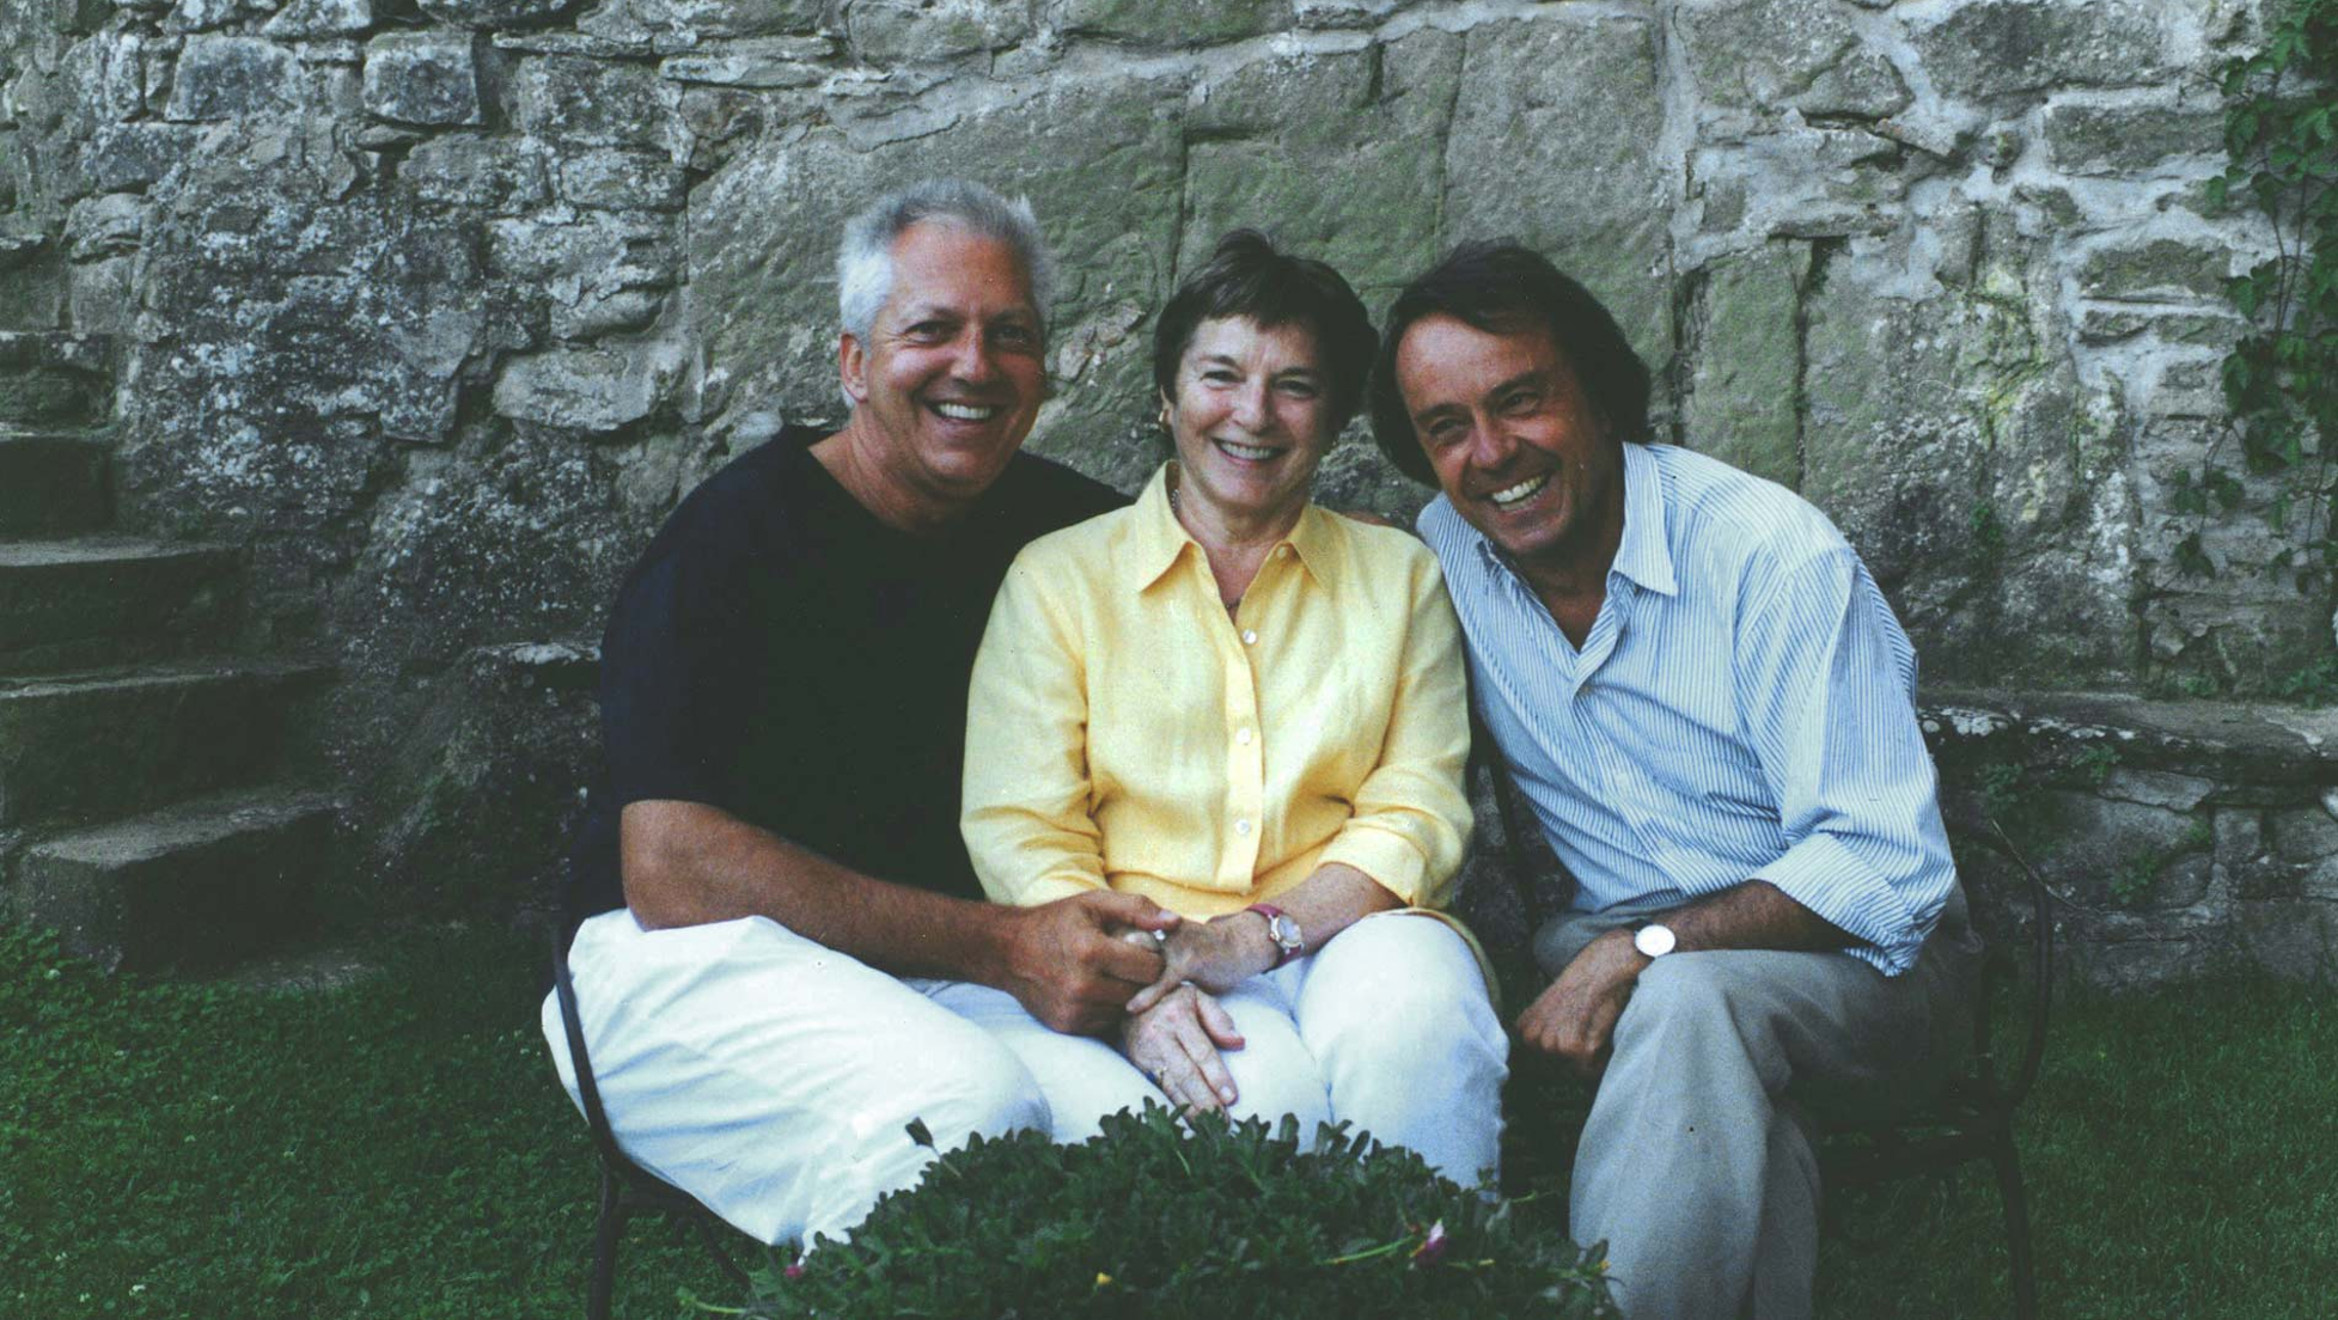 The photo shows Edward Kleinschmidt Mayes, Frances Mayes and Fulvio Di Rosa